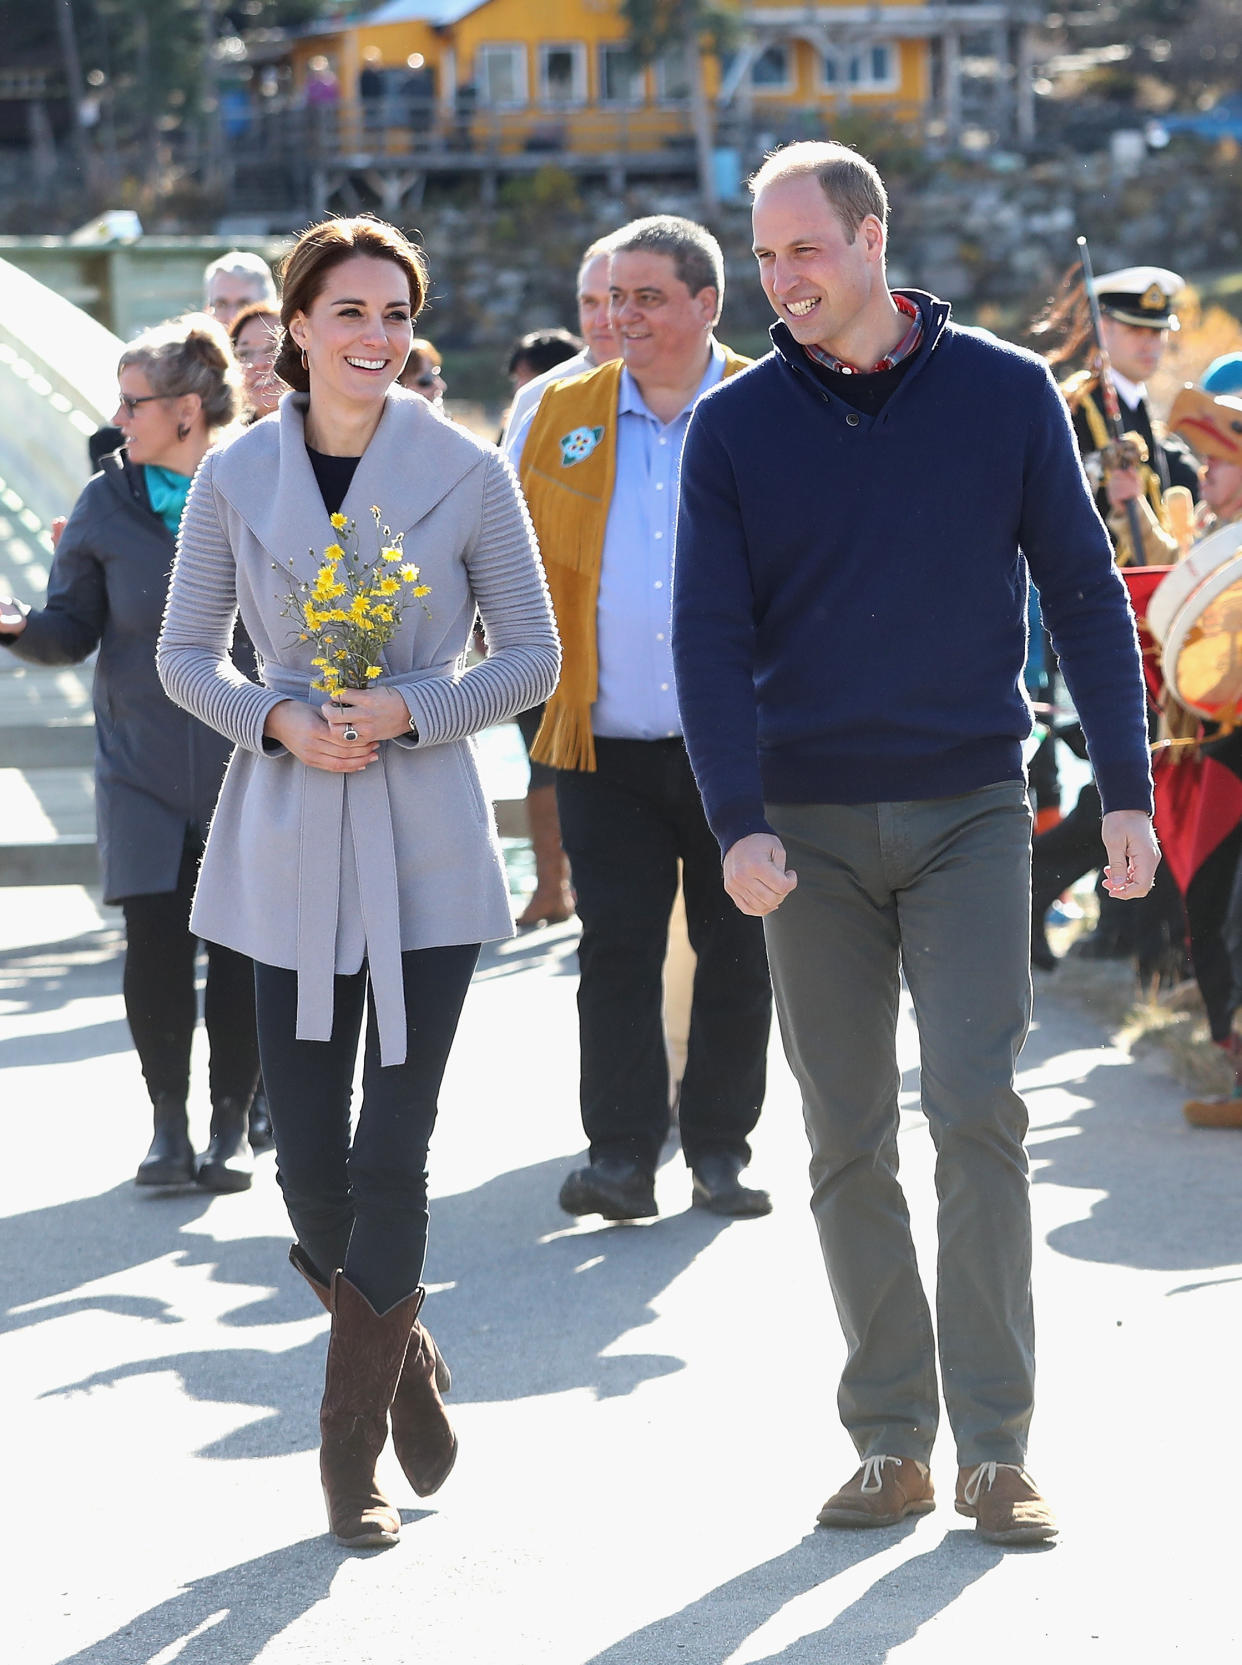 CARCROSS, BC - SEPTEMBER 28:  Catherine, Duchess of Cambridge and Prince William, Duke of Cambridge visit Carcross during the Royal Tour of Canada on September 28, 2016 in Carcross, Canada. Prince William, Duke of Cambridge, Catherine, Duchess of Cambridge, Prince George and Princess Charlotte are visiting Canada as part of an eight day visit to the country taking in areas such as Bella Bella, Whitehorse and Kelowna  (Photo by Chris Jackson/Getty Images)